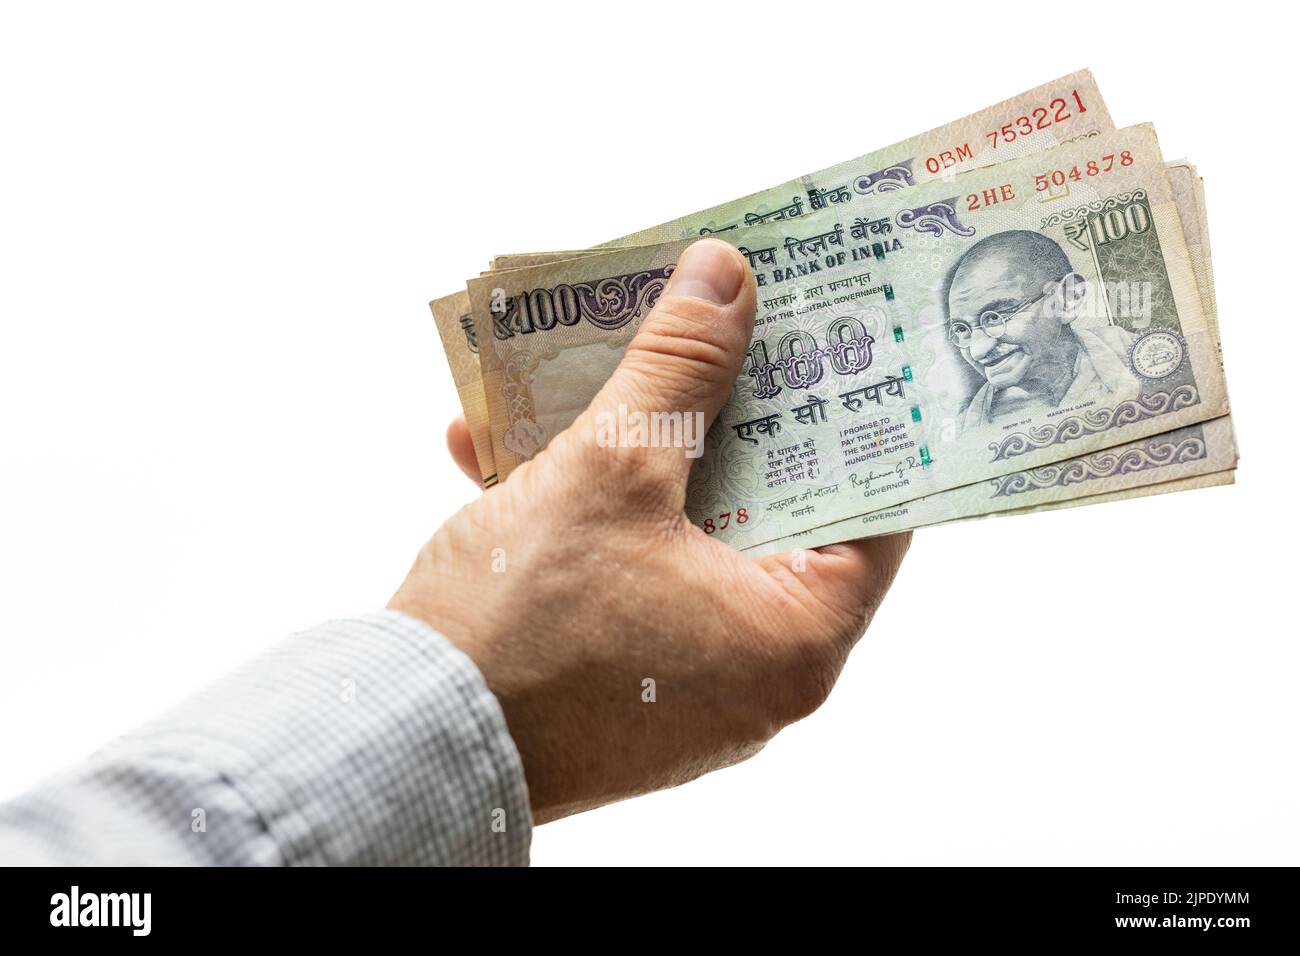 Indian rupees, bundle of money, held in hand on a light background Stock Photo